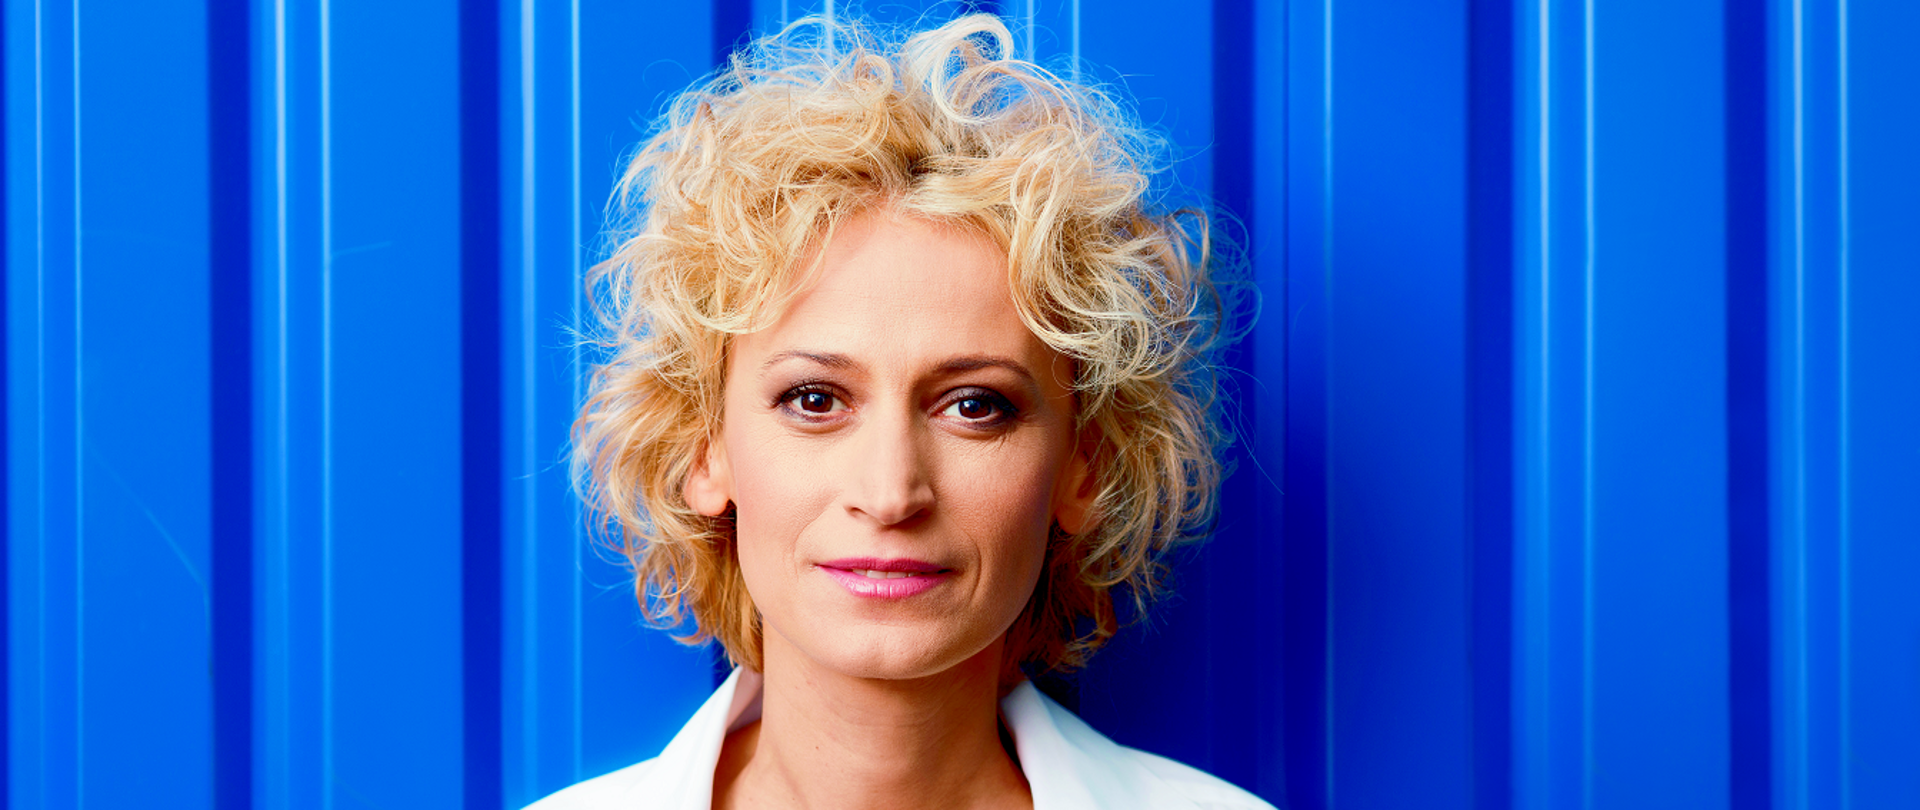 On a blue background, a woman with blond hair dressed in a white shirt